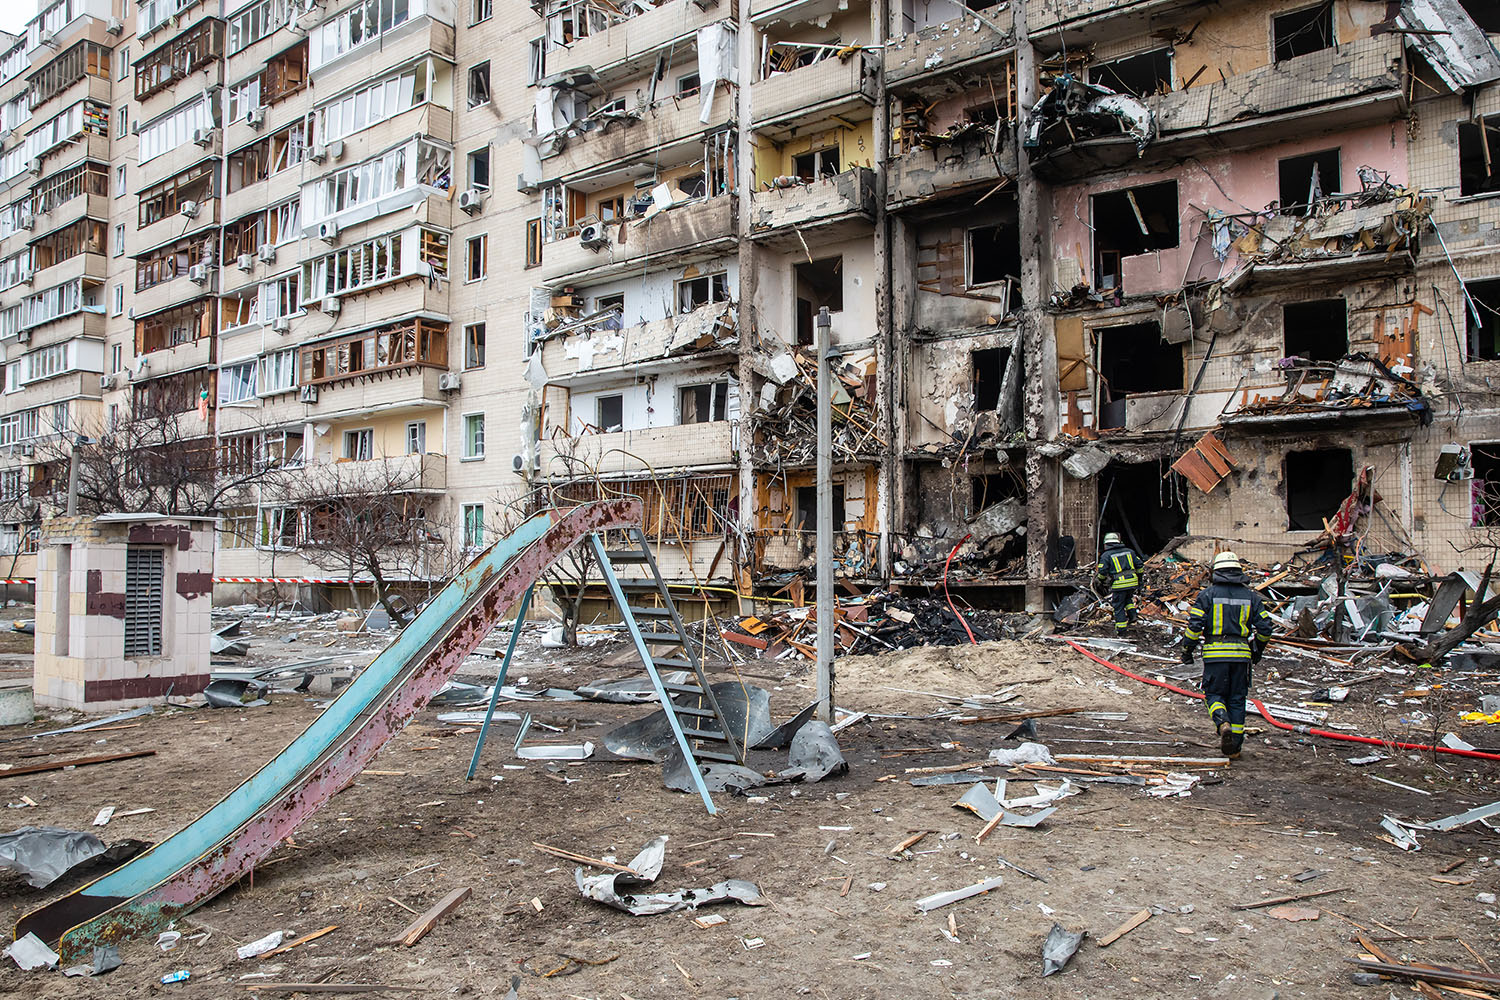 A residential building damaged by invading Russian forces in the Ukrainian capital Kyiv.